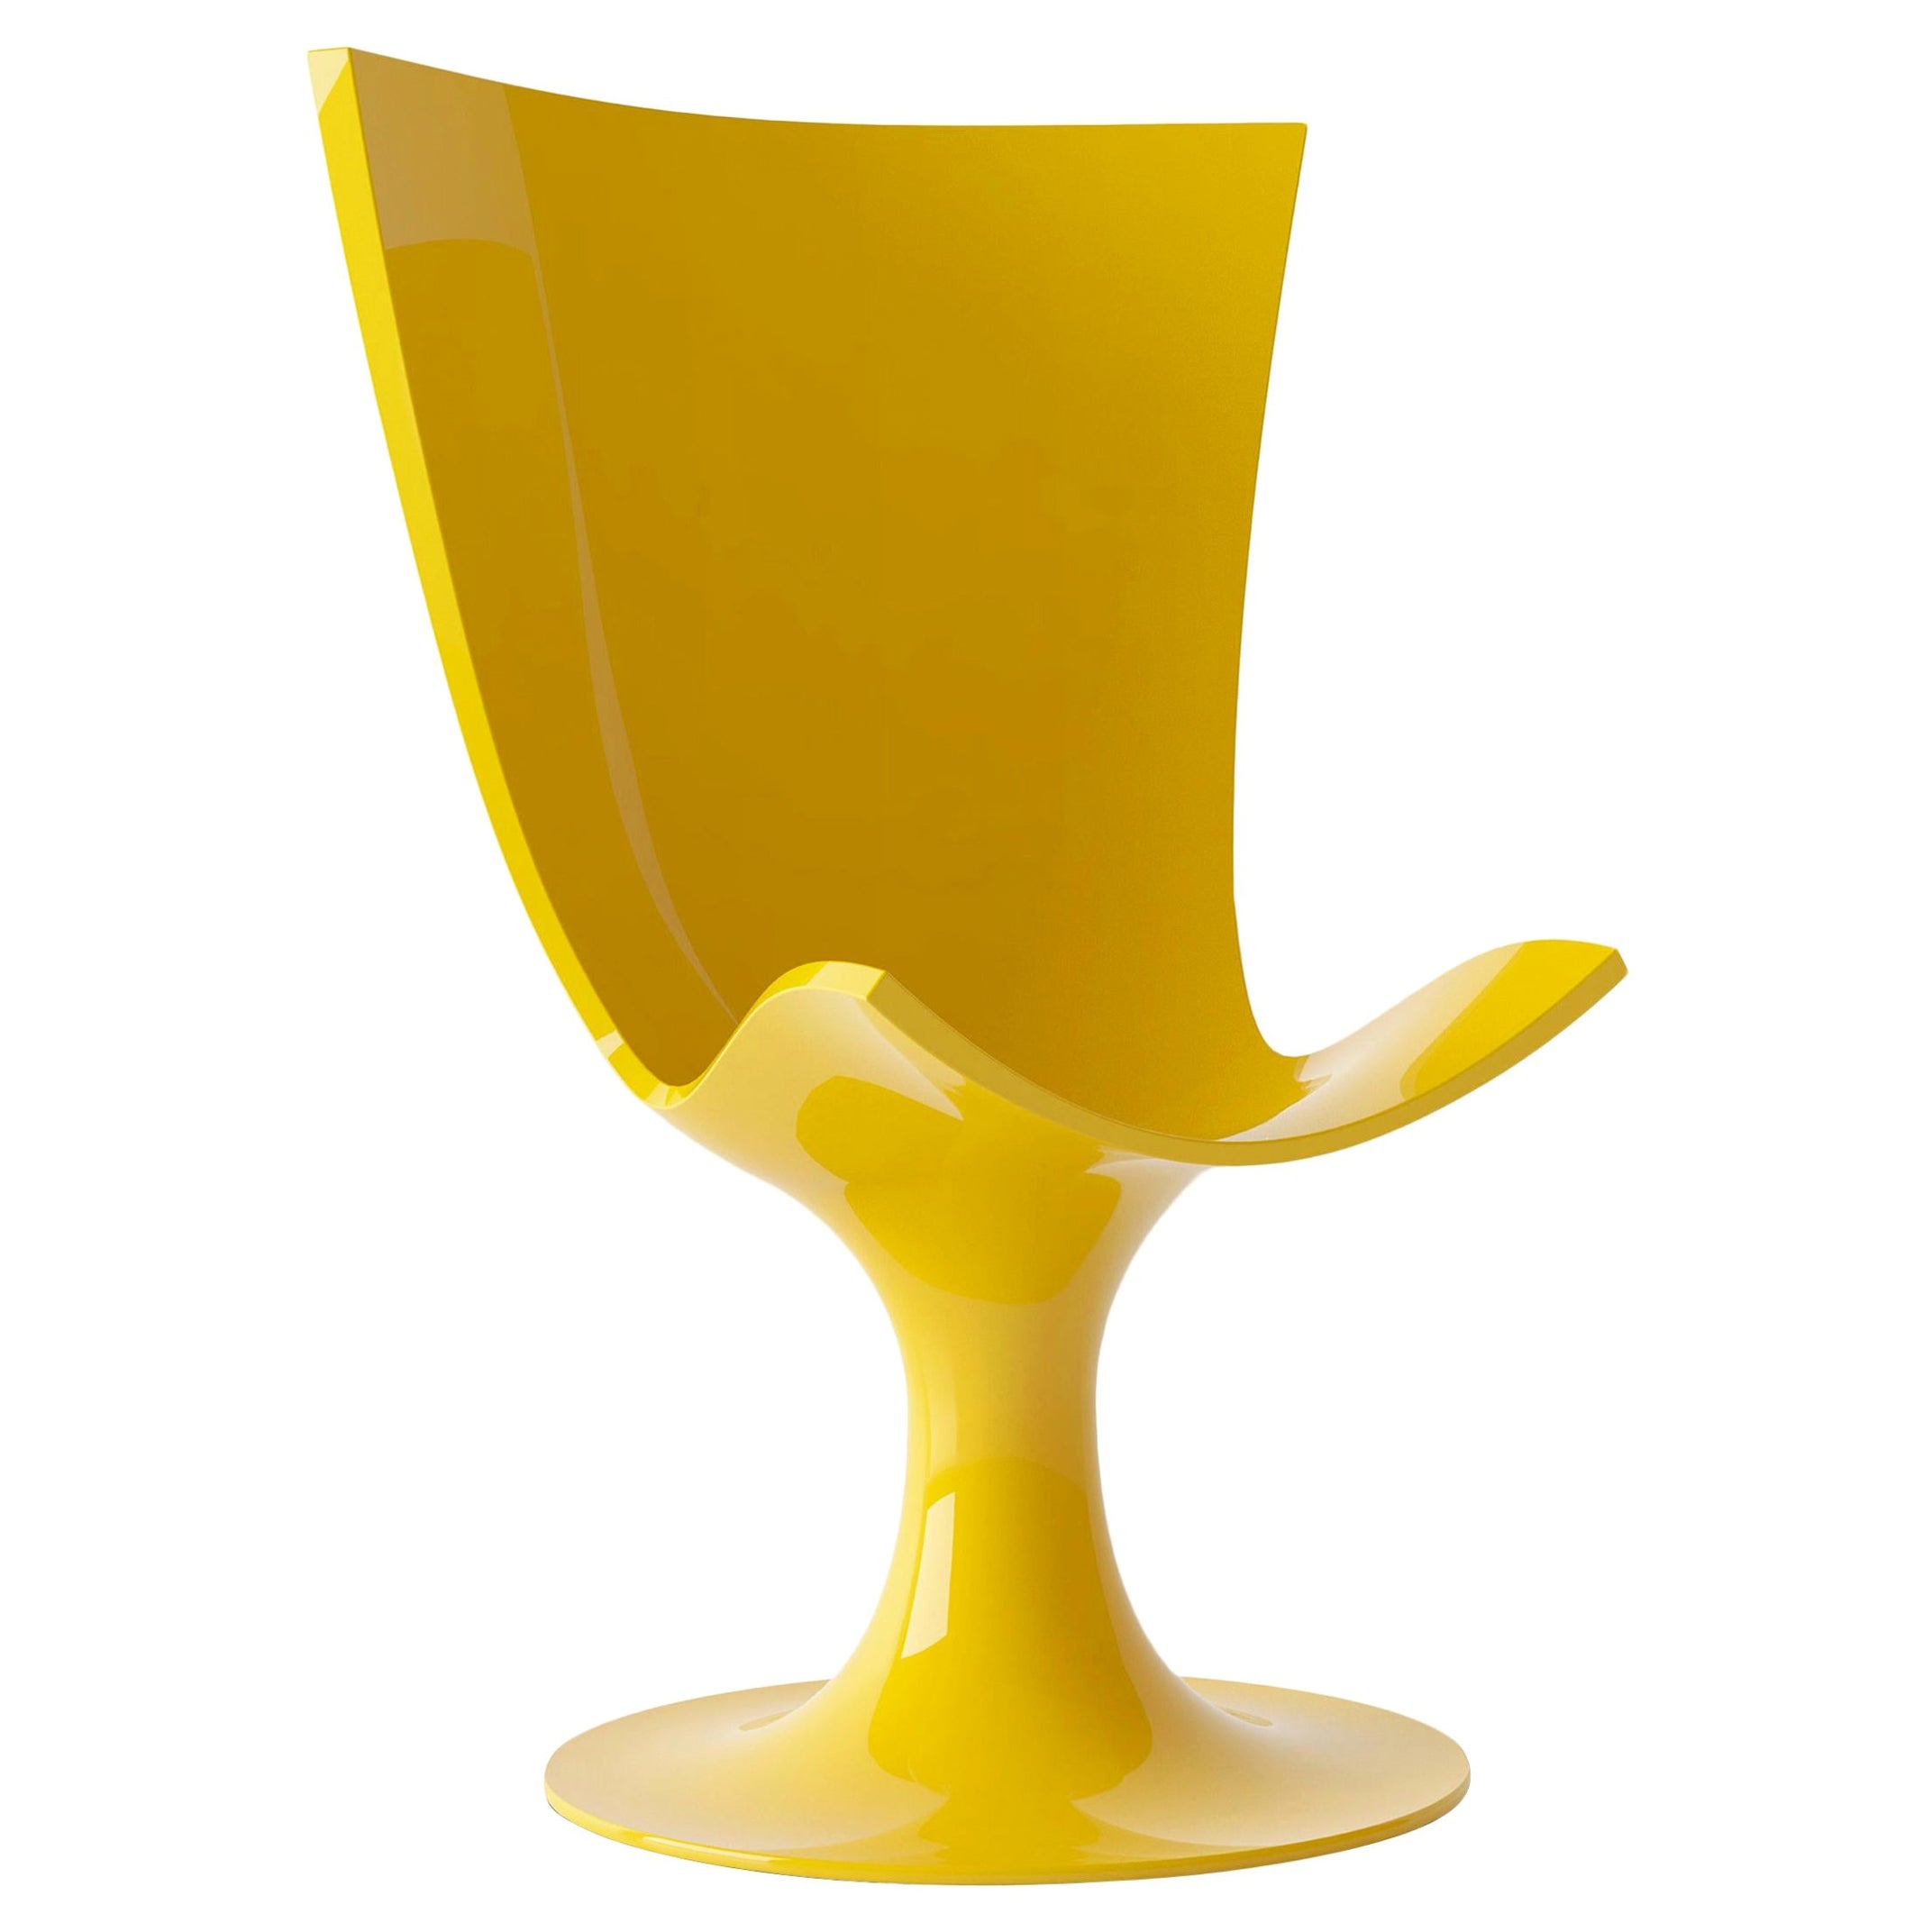 Santos, Imposing Seat, Sculptural Chair in Yellow by Joel Escalona For Sale